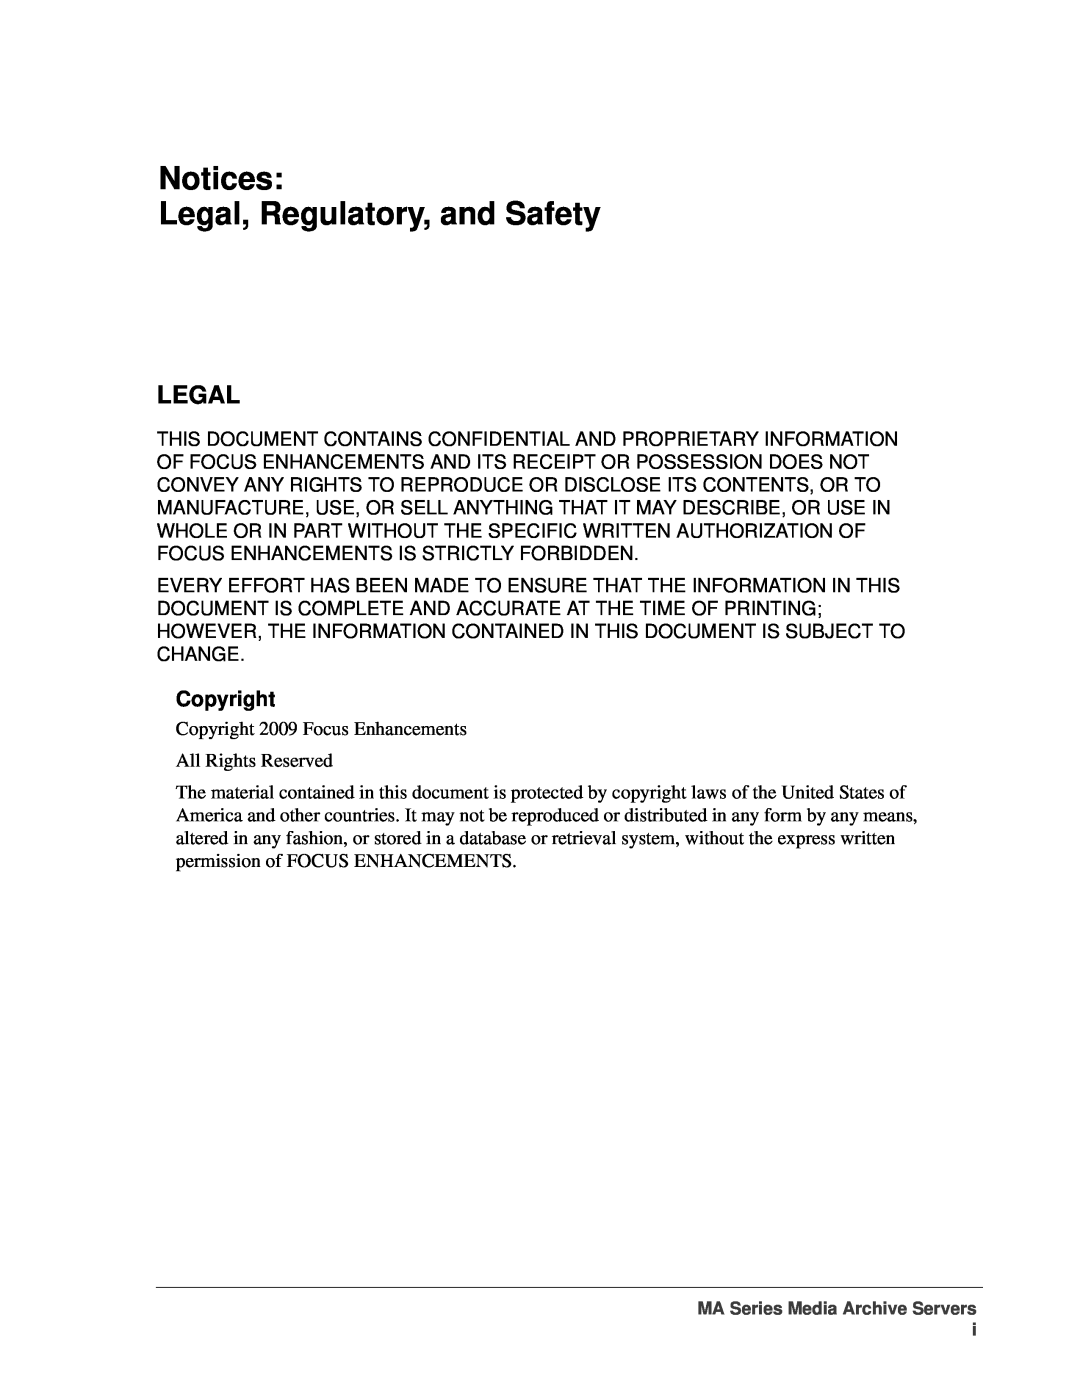 FOCUS Enhancements MANL-1161-04 manual Notices Legal, Regulatory, and Safety, Copyright 